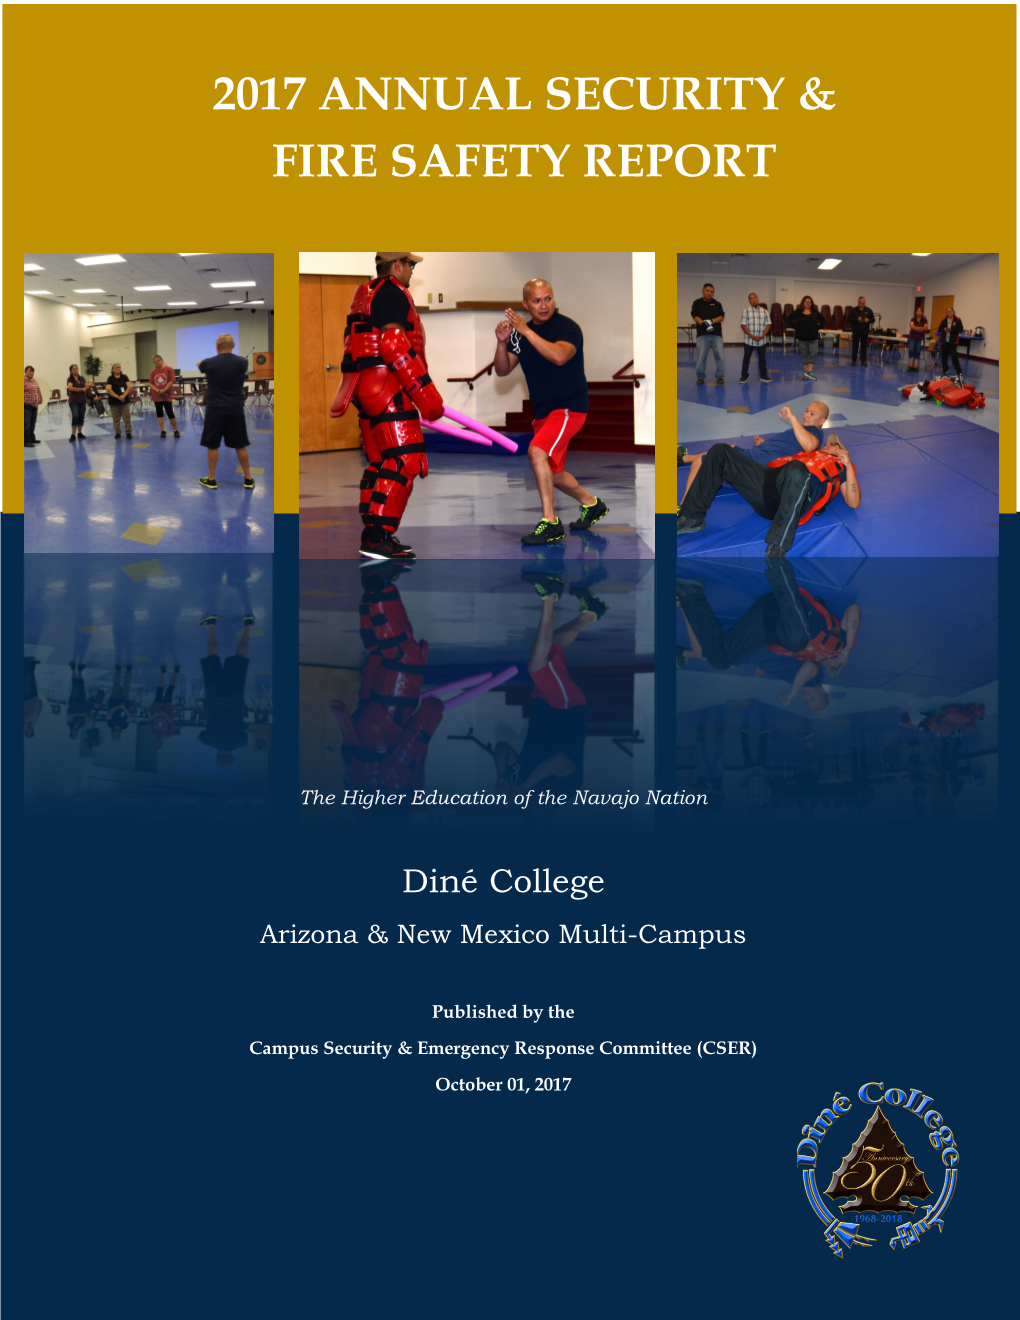 2017 Annual Security & Fire Safety Report